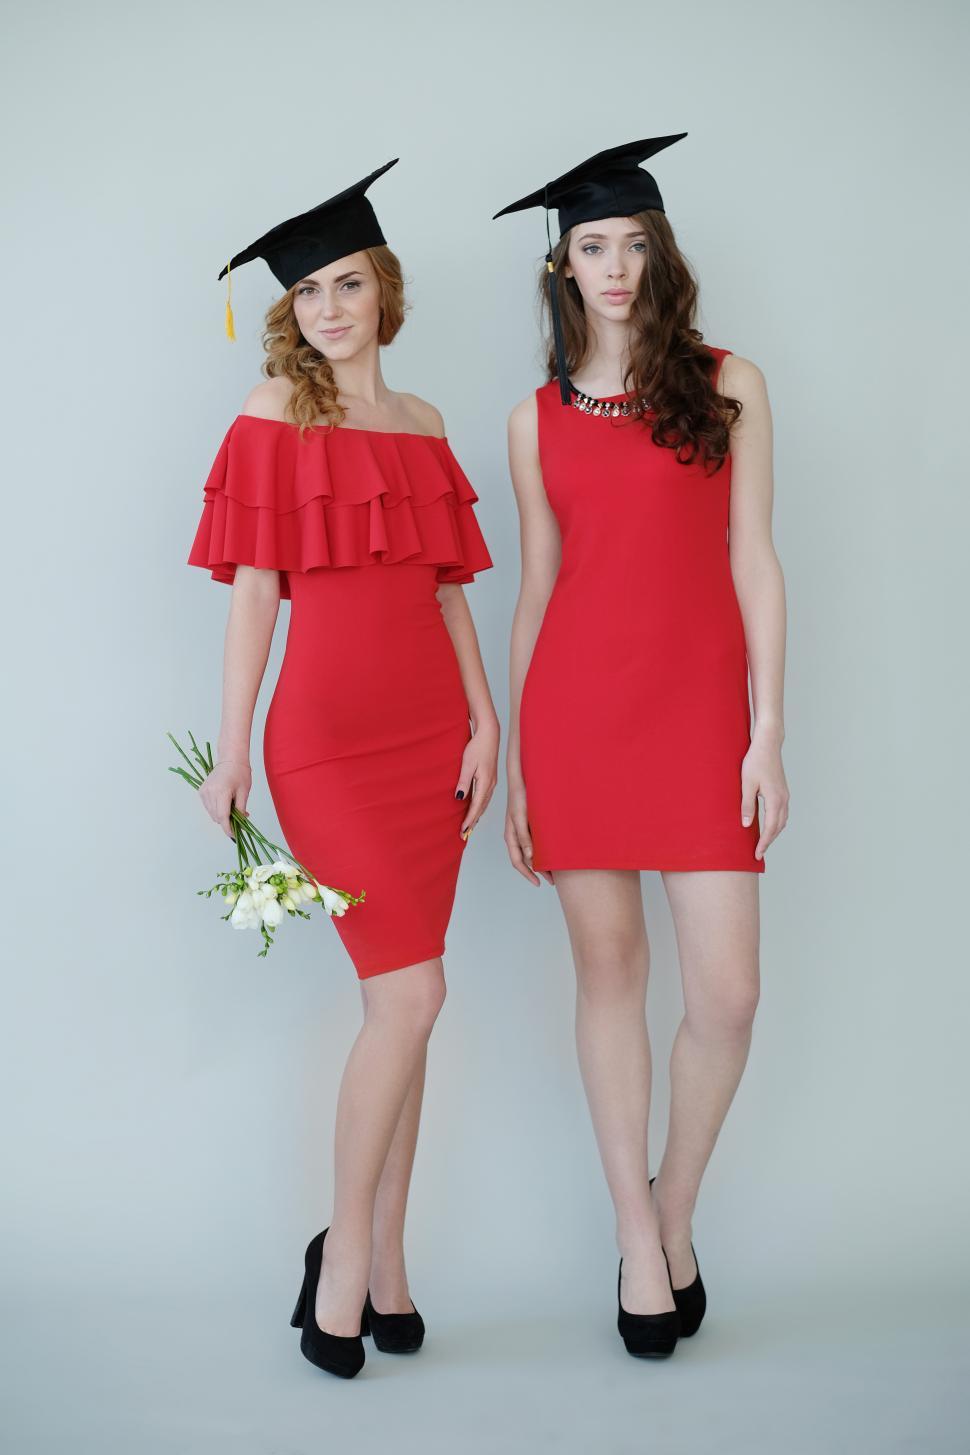 Free Image of Women in graduation outfits 